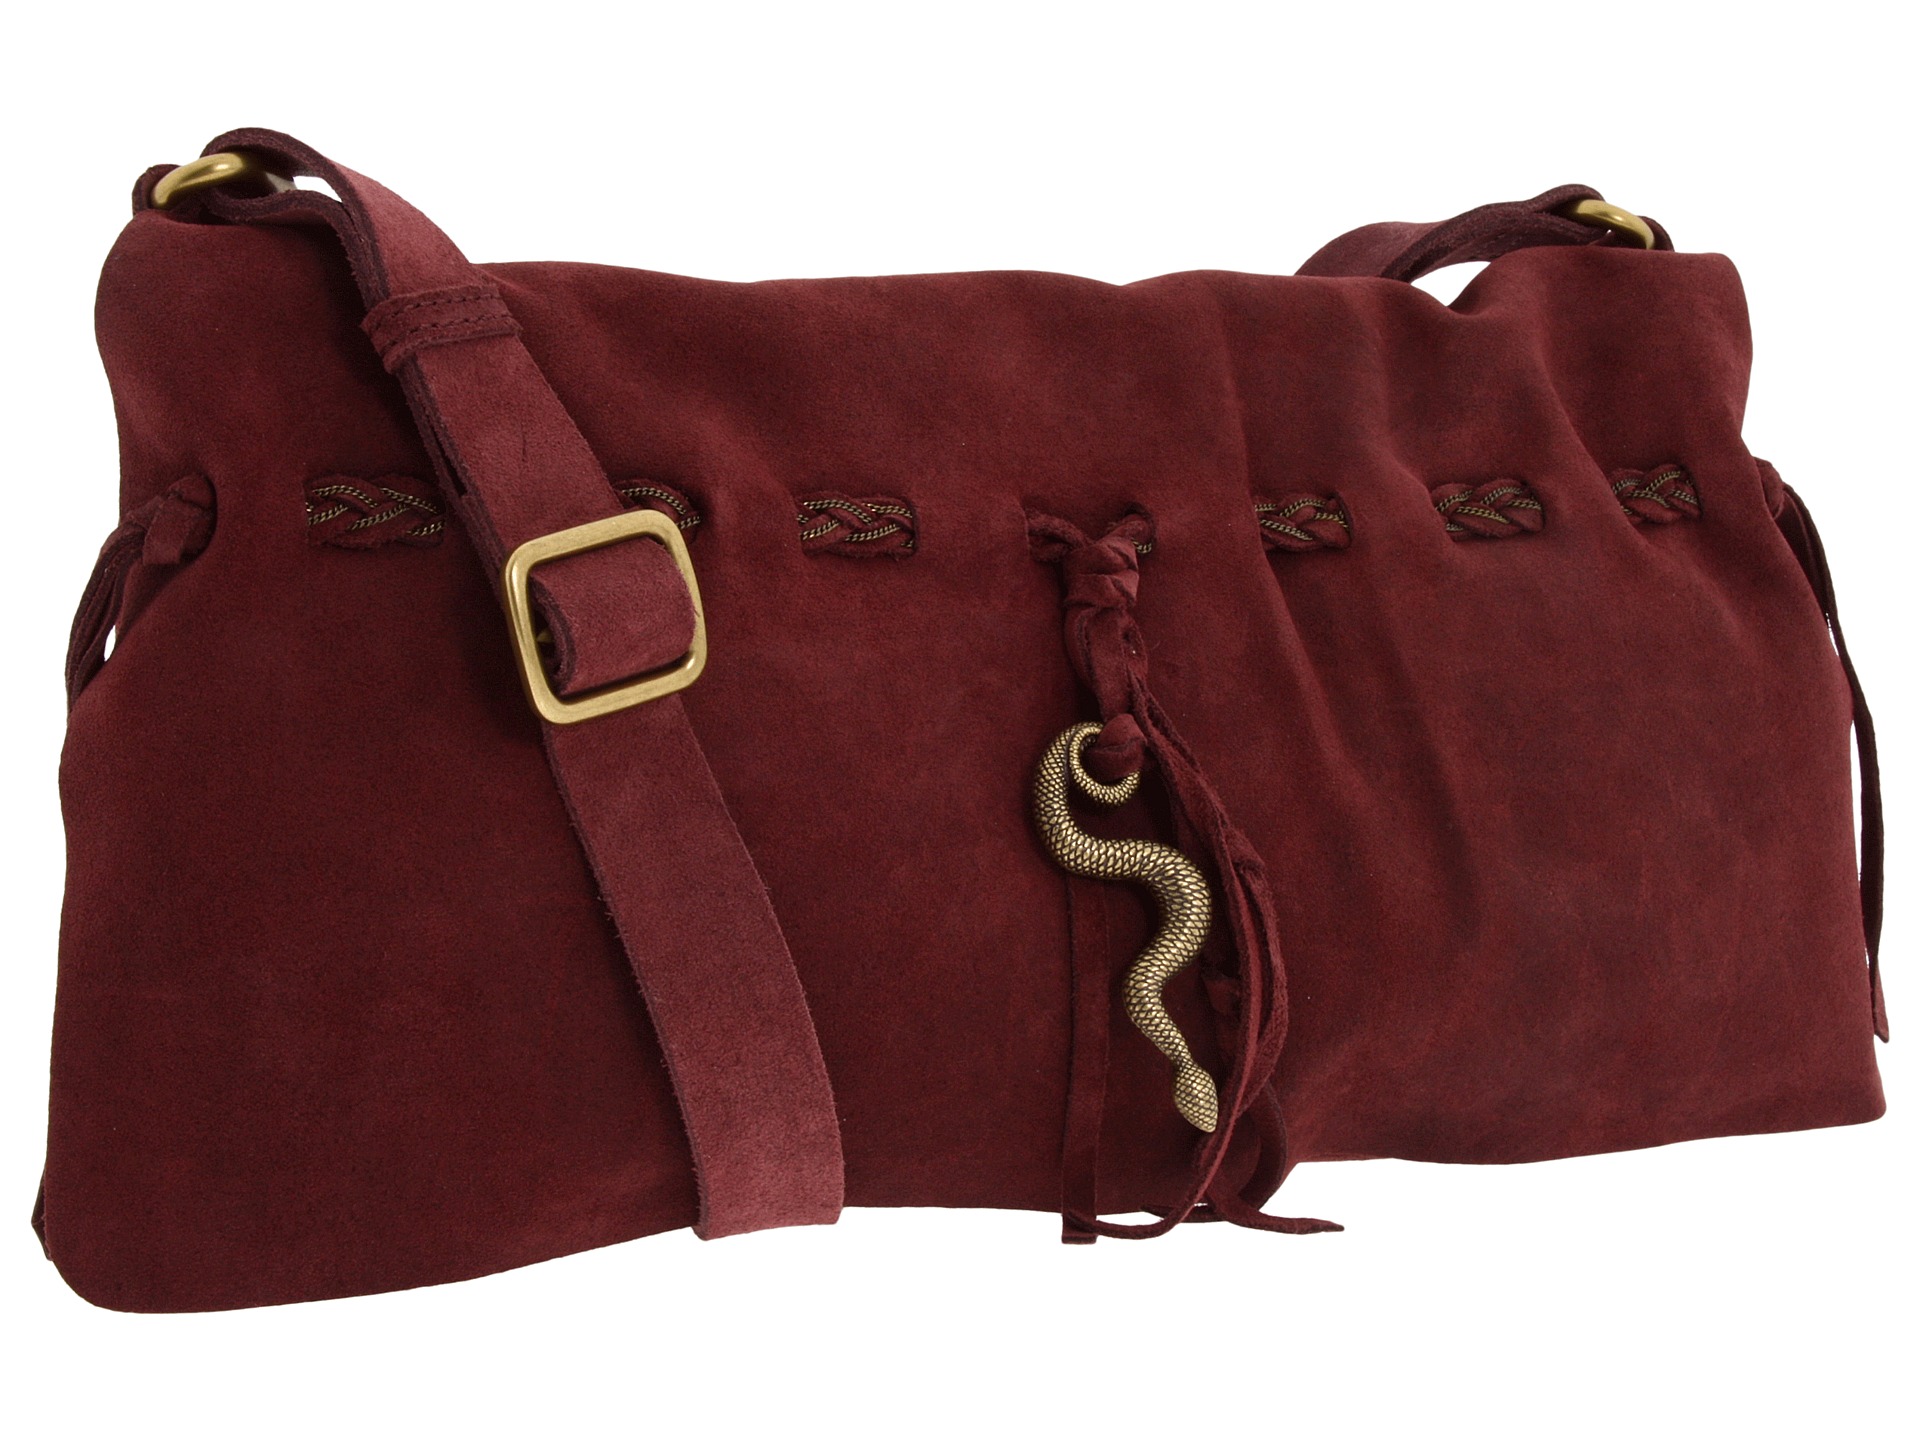 Lucky Brand   Hollywood & Vine Suede Baguette Crossbody